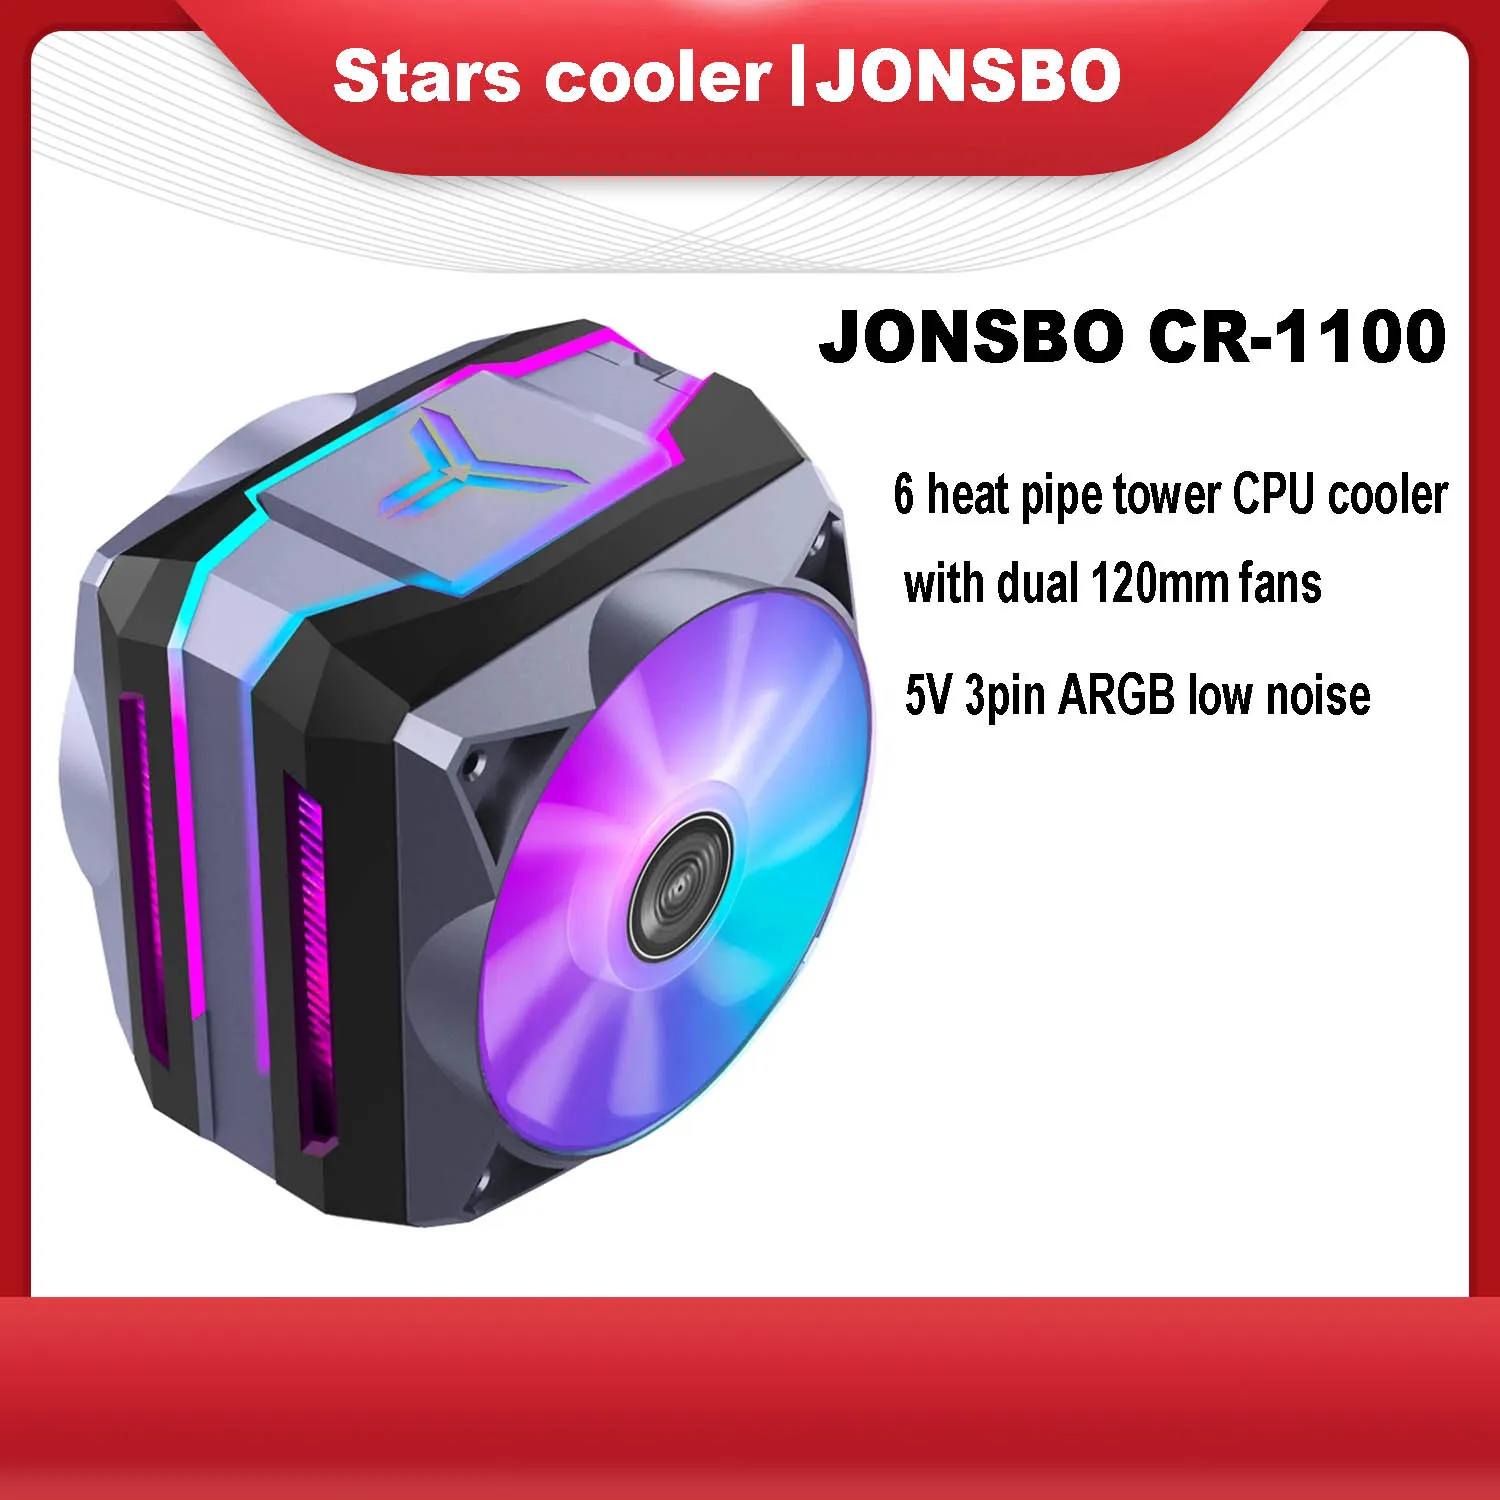 JONSBO CR-1100 5V 3pin ARGB/6 heat pipe tower CPU cooler/with dual 12cm fans/CPU cooling for Intel 775 115X AMD AM4 enlarge